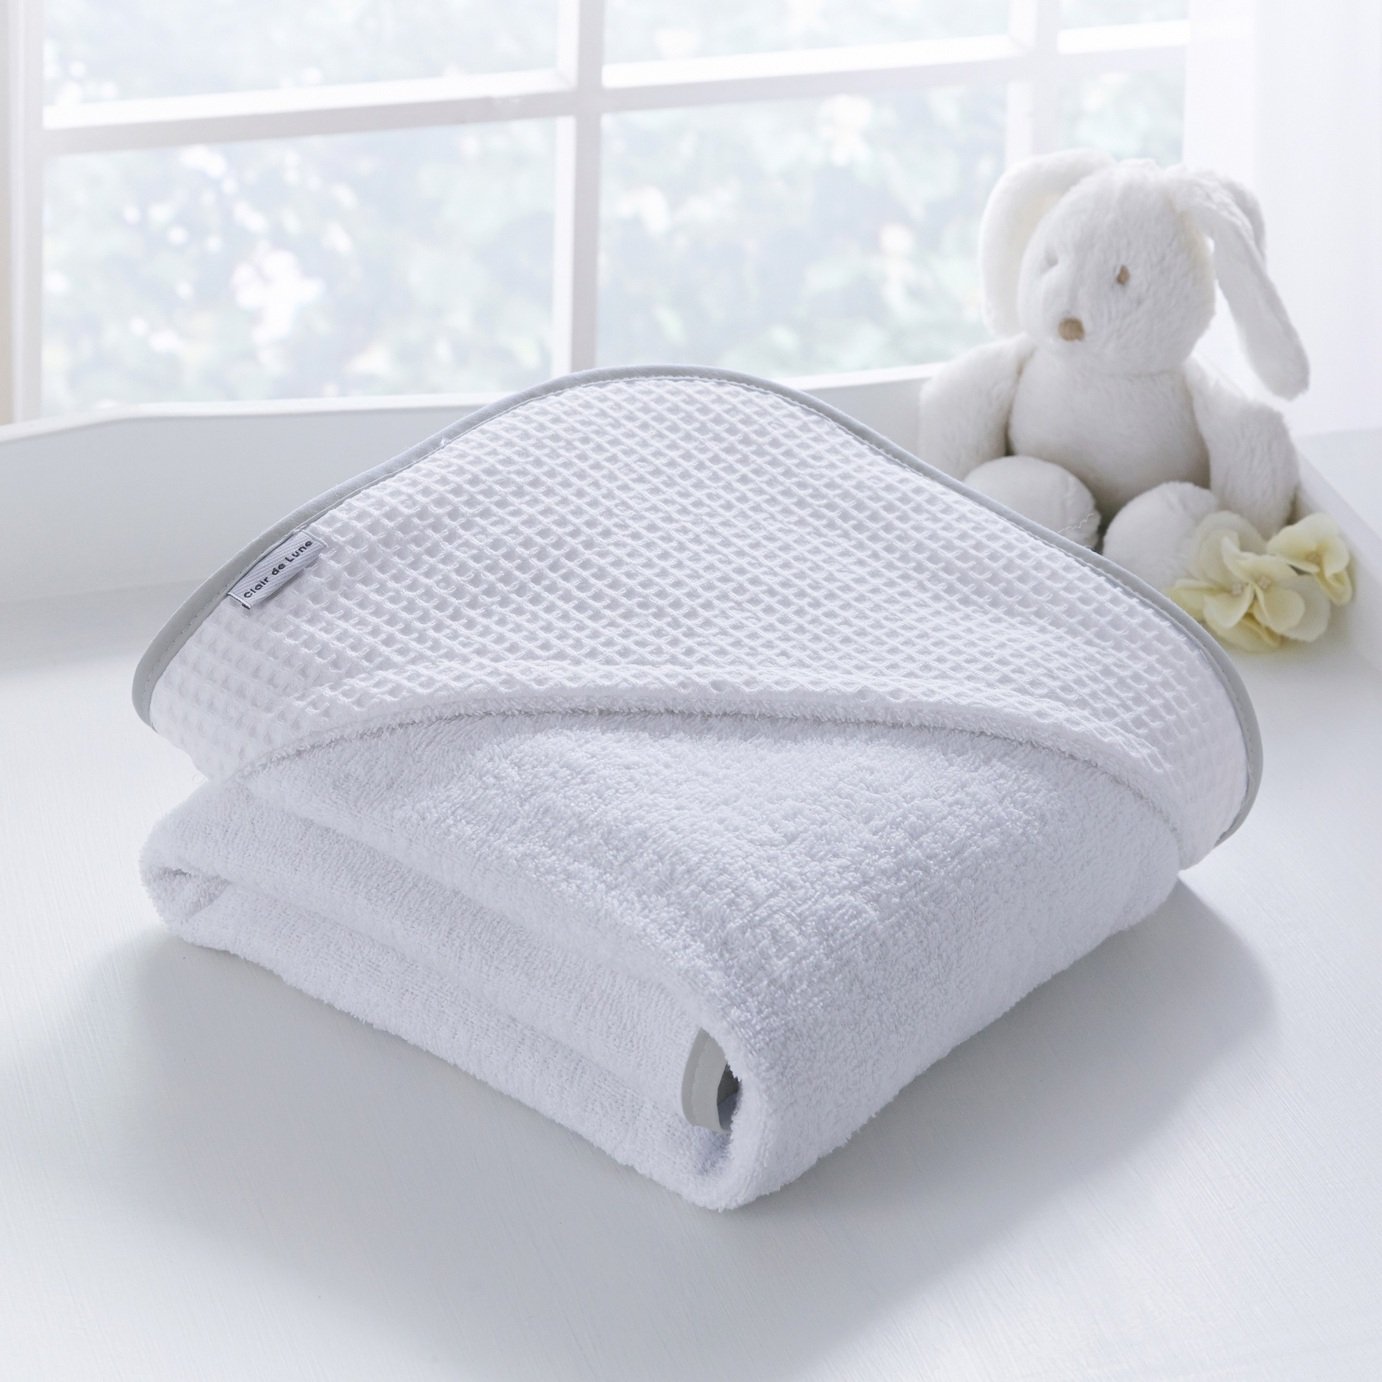 Clair de Lune Over The Moon Baby Hooded Towel Review